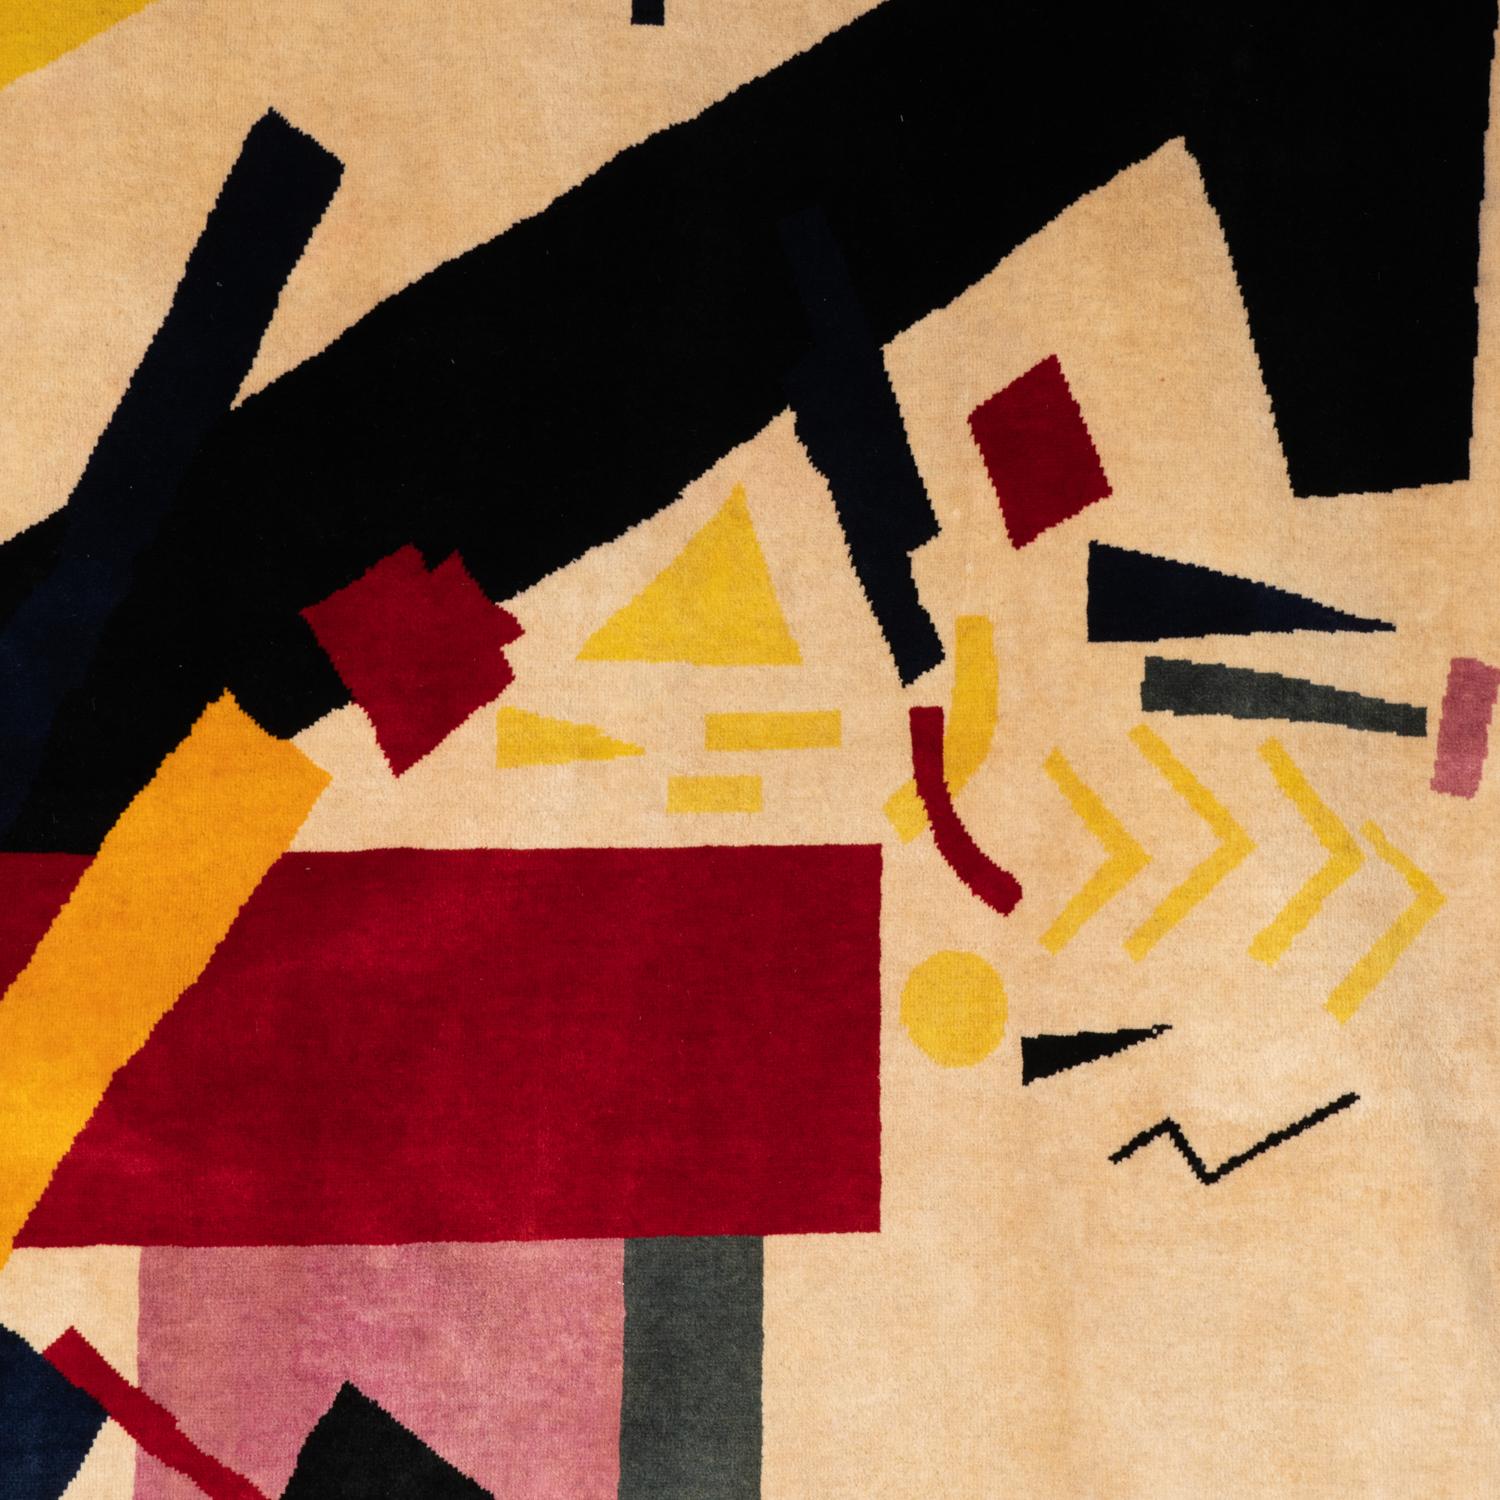 Rug, or tapestry, after a work by Kasimir Malevich entitled “Suprematist Composition 2” and dated 1915. Hand-knotted in Merino wool.

Contemporary craftsmanship.

Numbered 1/8. Surface area: 5 M2. Density: 840,000 knots.

Delivered with a